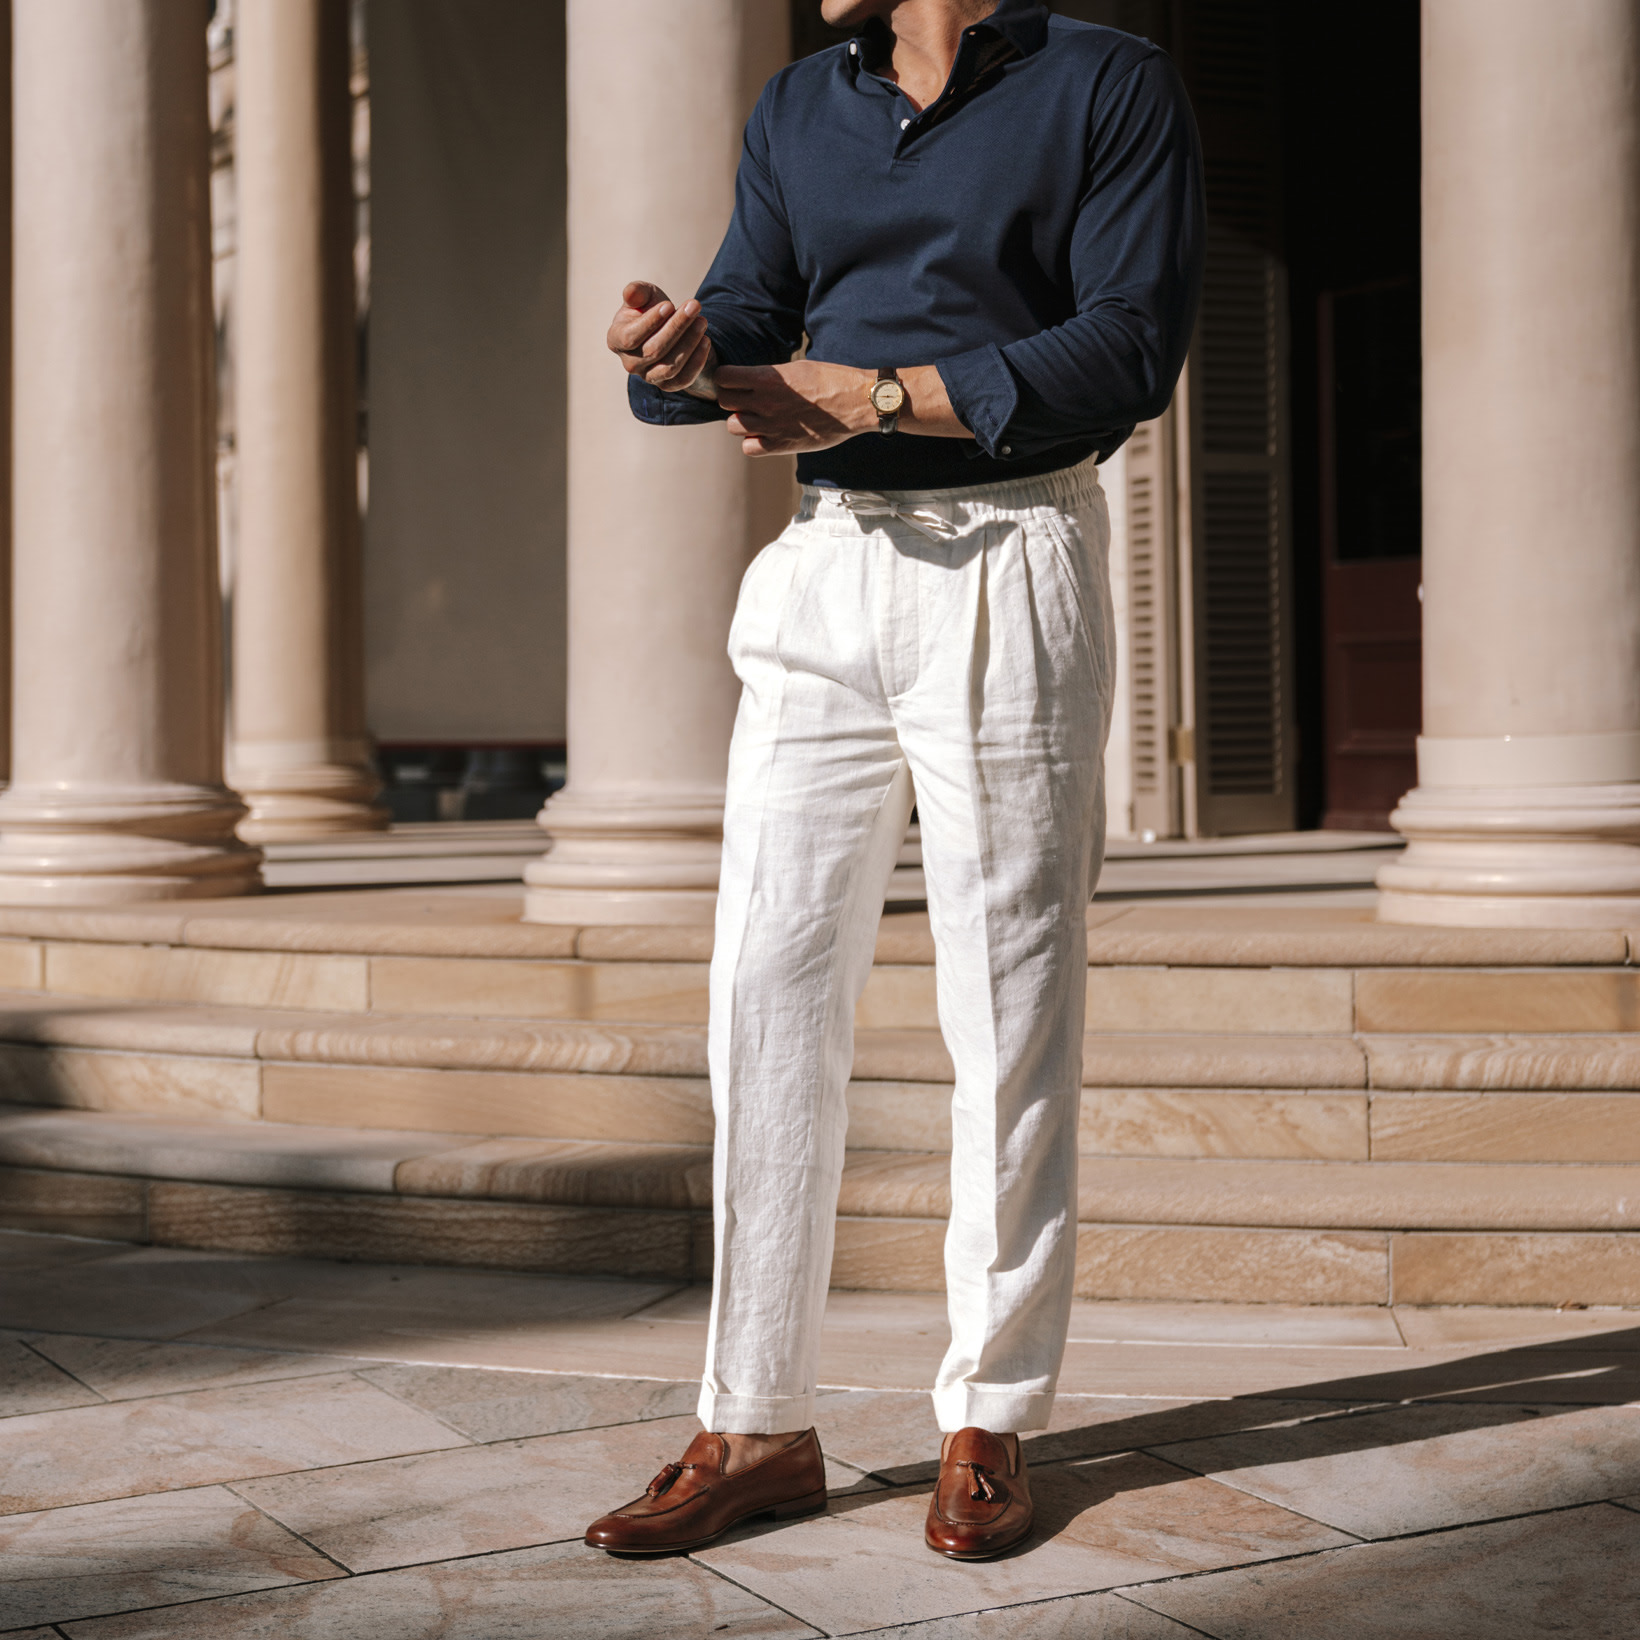 How to Style Men's Loafers for Every Day - Aquila